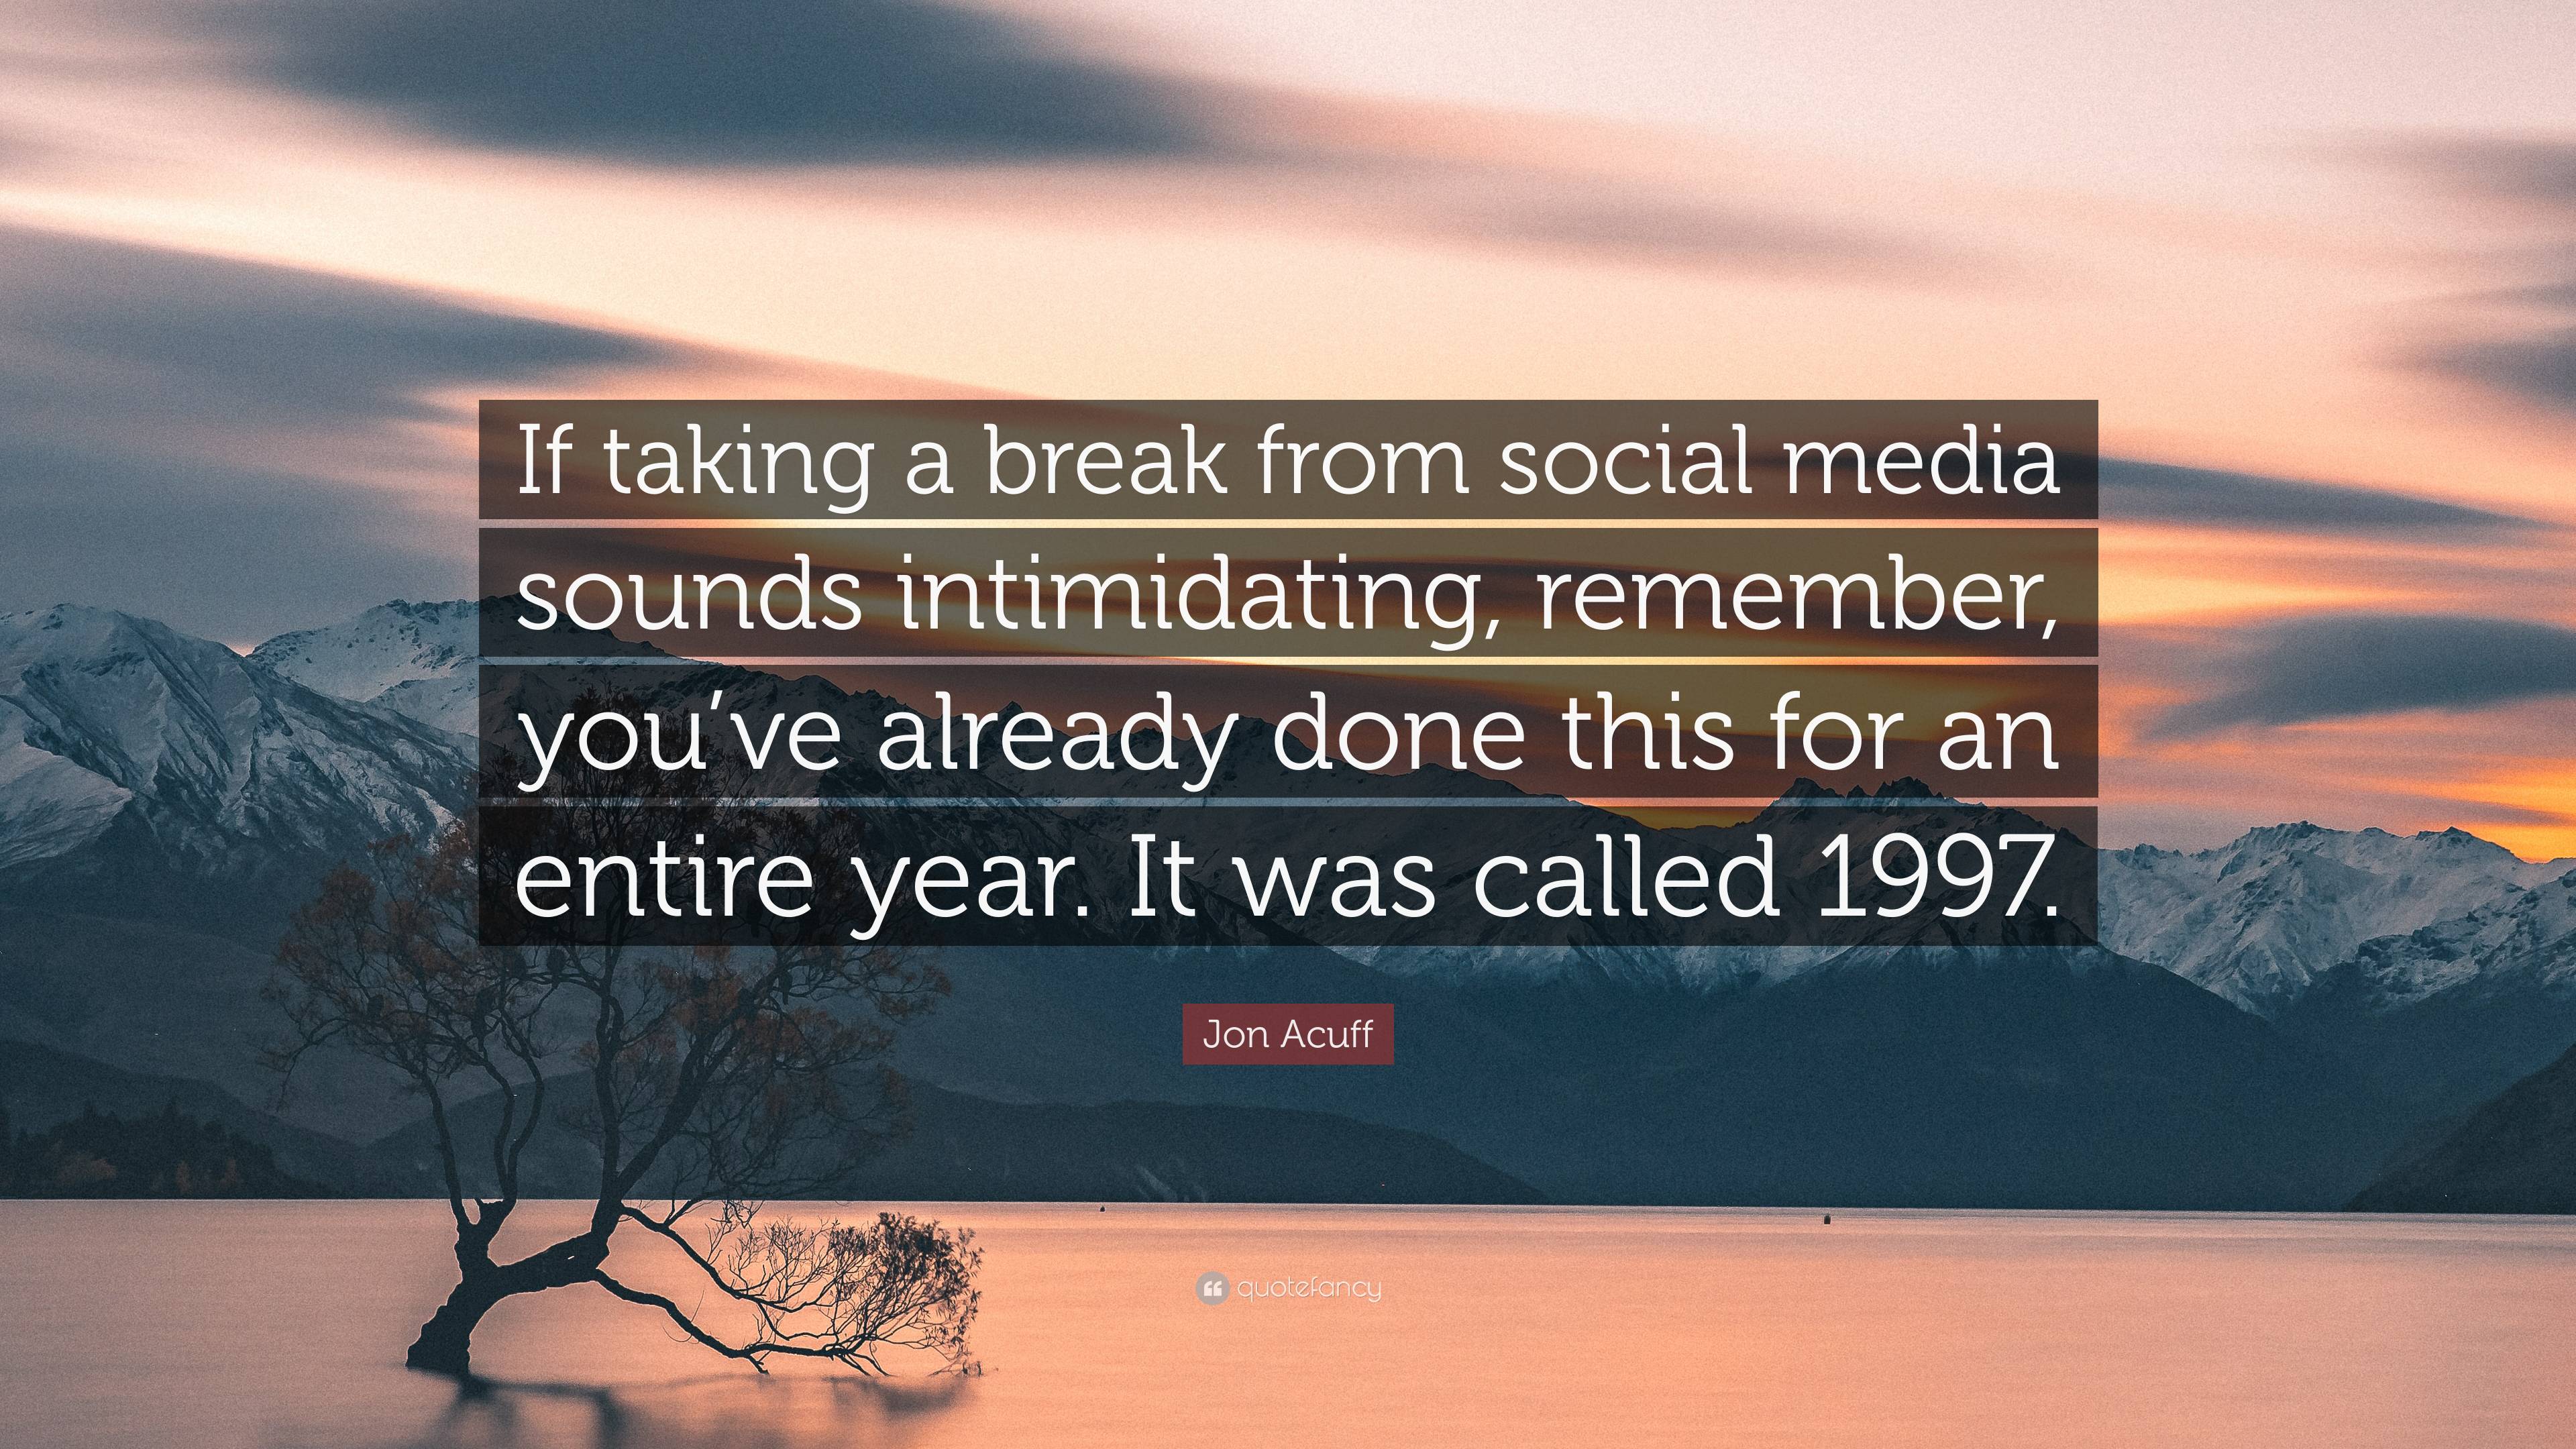 Jon Acuff Quote: “If taking a break from social media sounds intimidating, remember, you've already done this for an entire year. It was c.” (2 wallpaper)